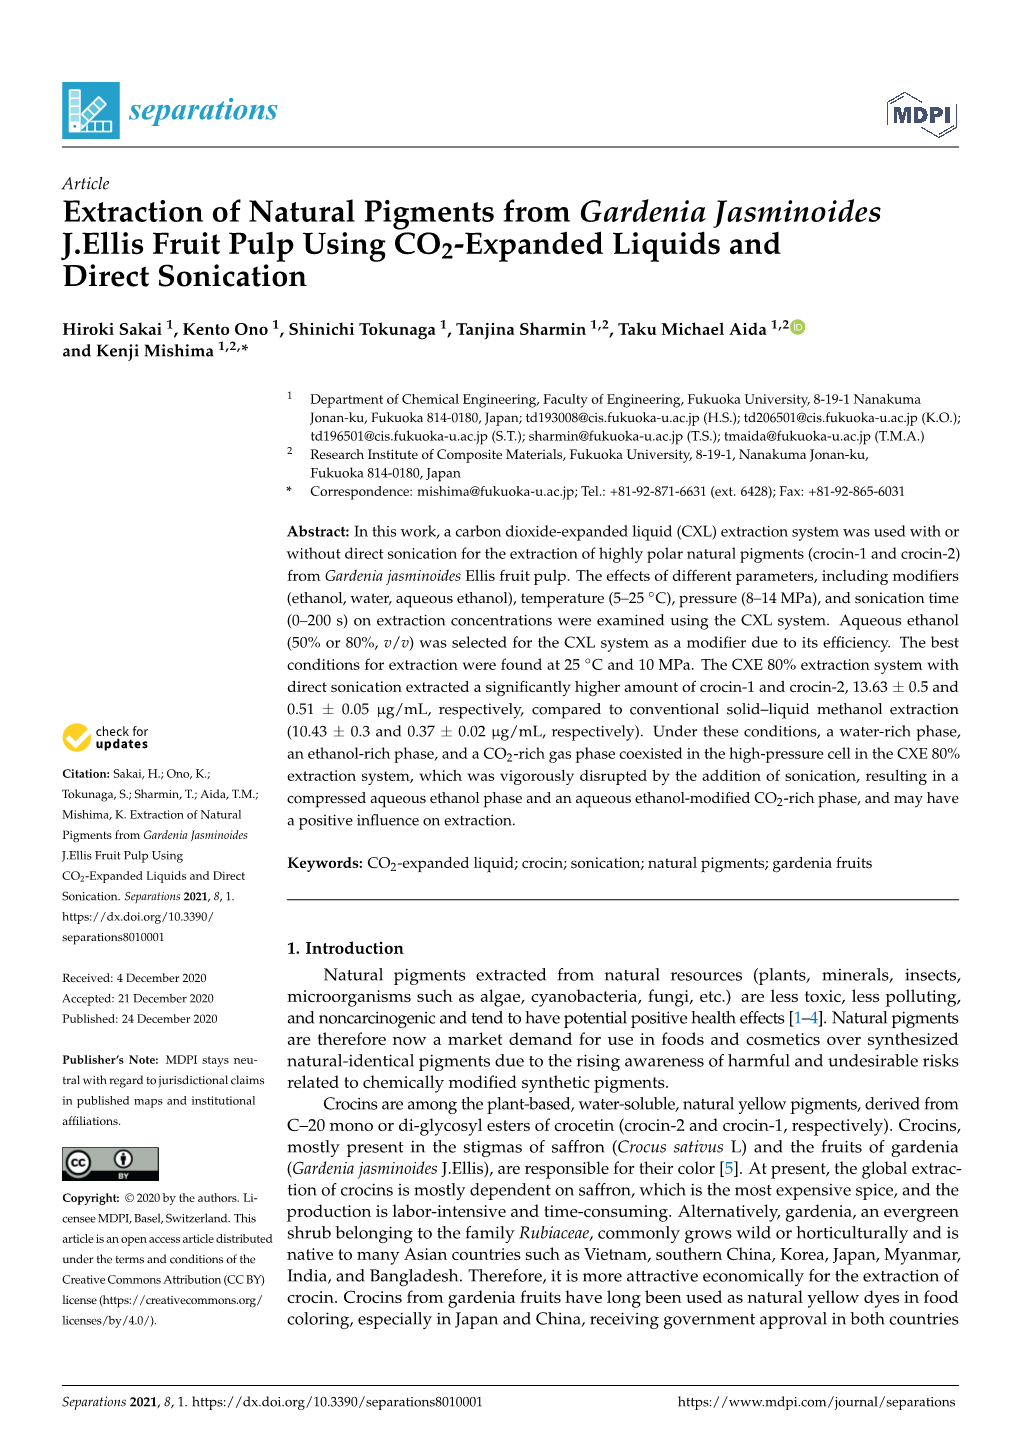 Extraction of Natural Pigments from Gardenia Jasminoides J.Ellis Fruit Pulp Using CO2-Expanded Liquids and Direct Sonication